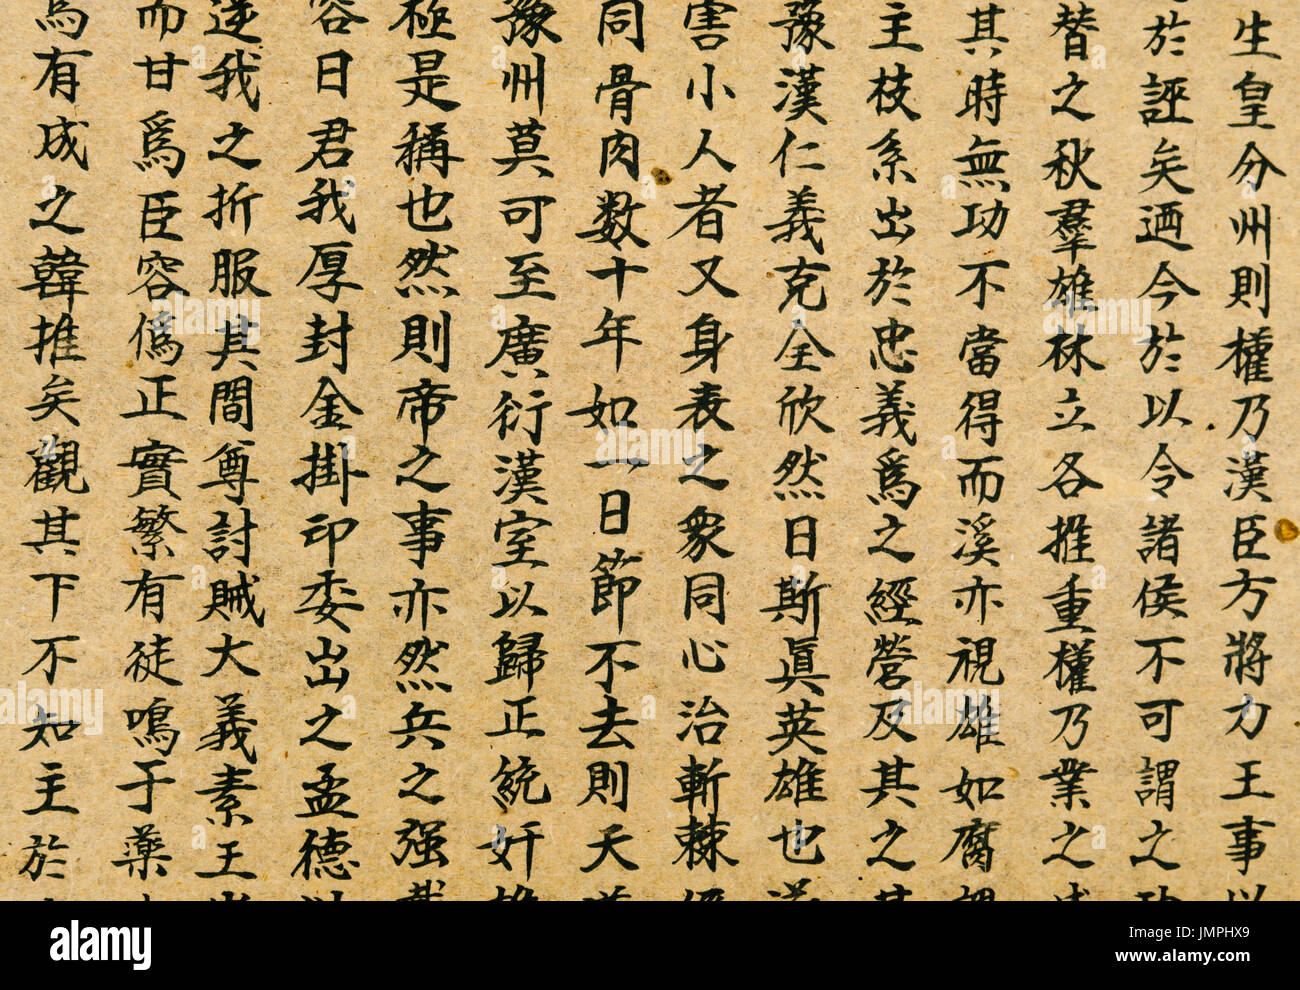 Chinese Writing Calligraphy Background High Resolution Stock